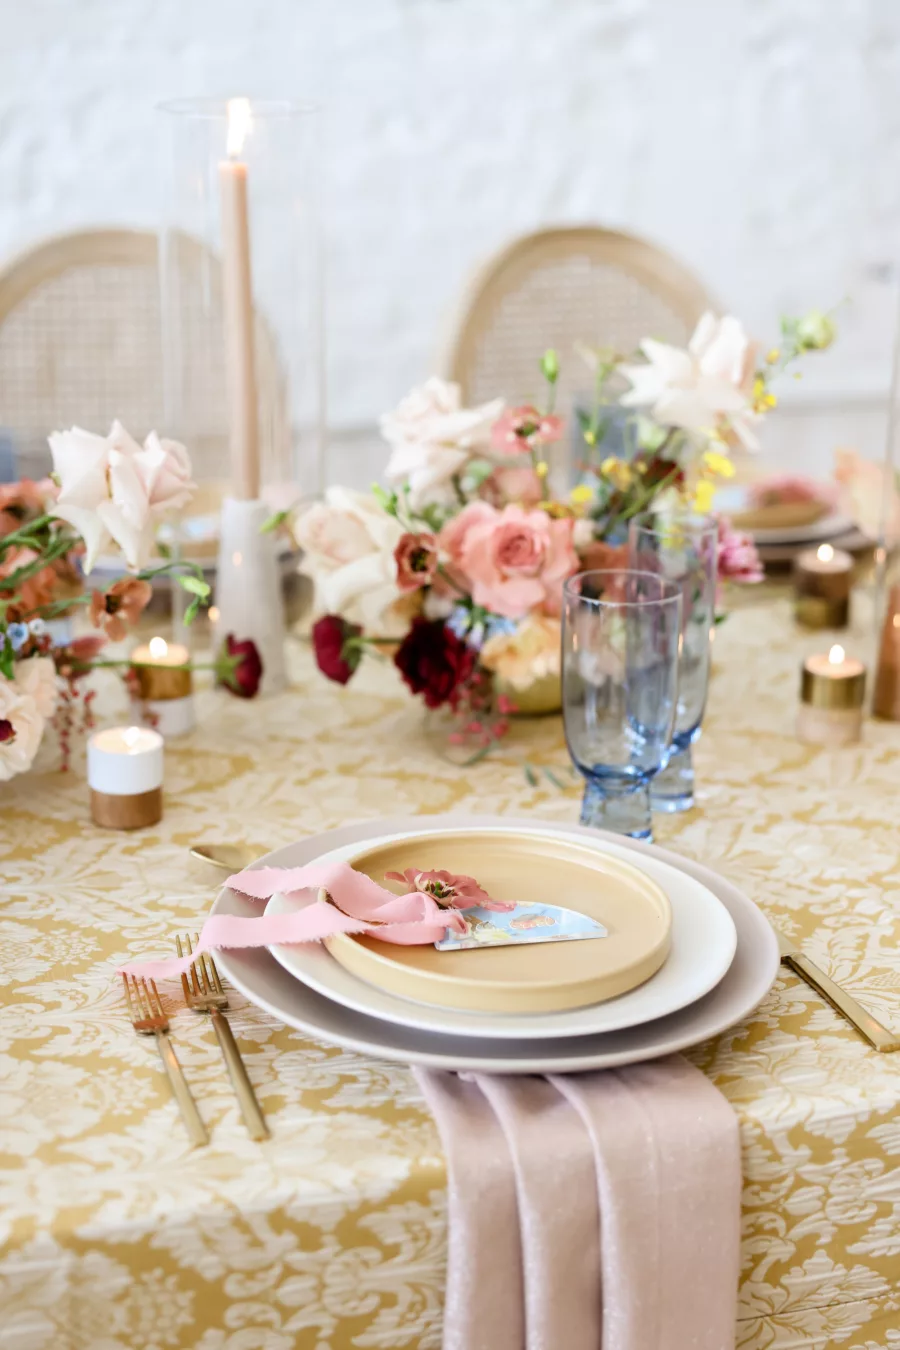 Retro Mid-Century Wedding Reception Yellow, Pink, Blue, and Red Place Setting Decor Inspiration